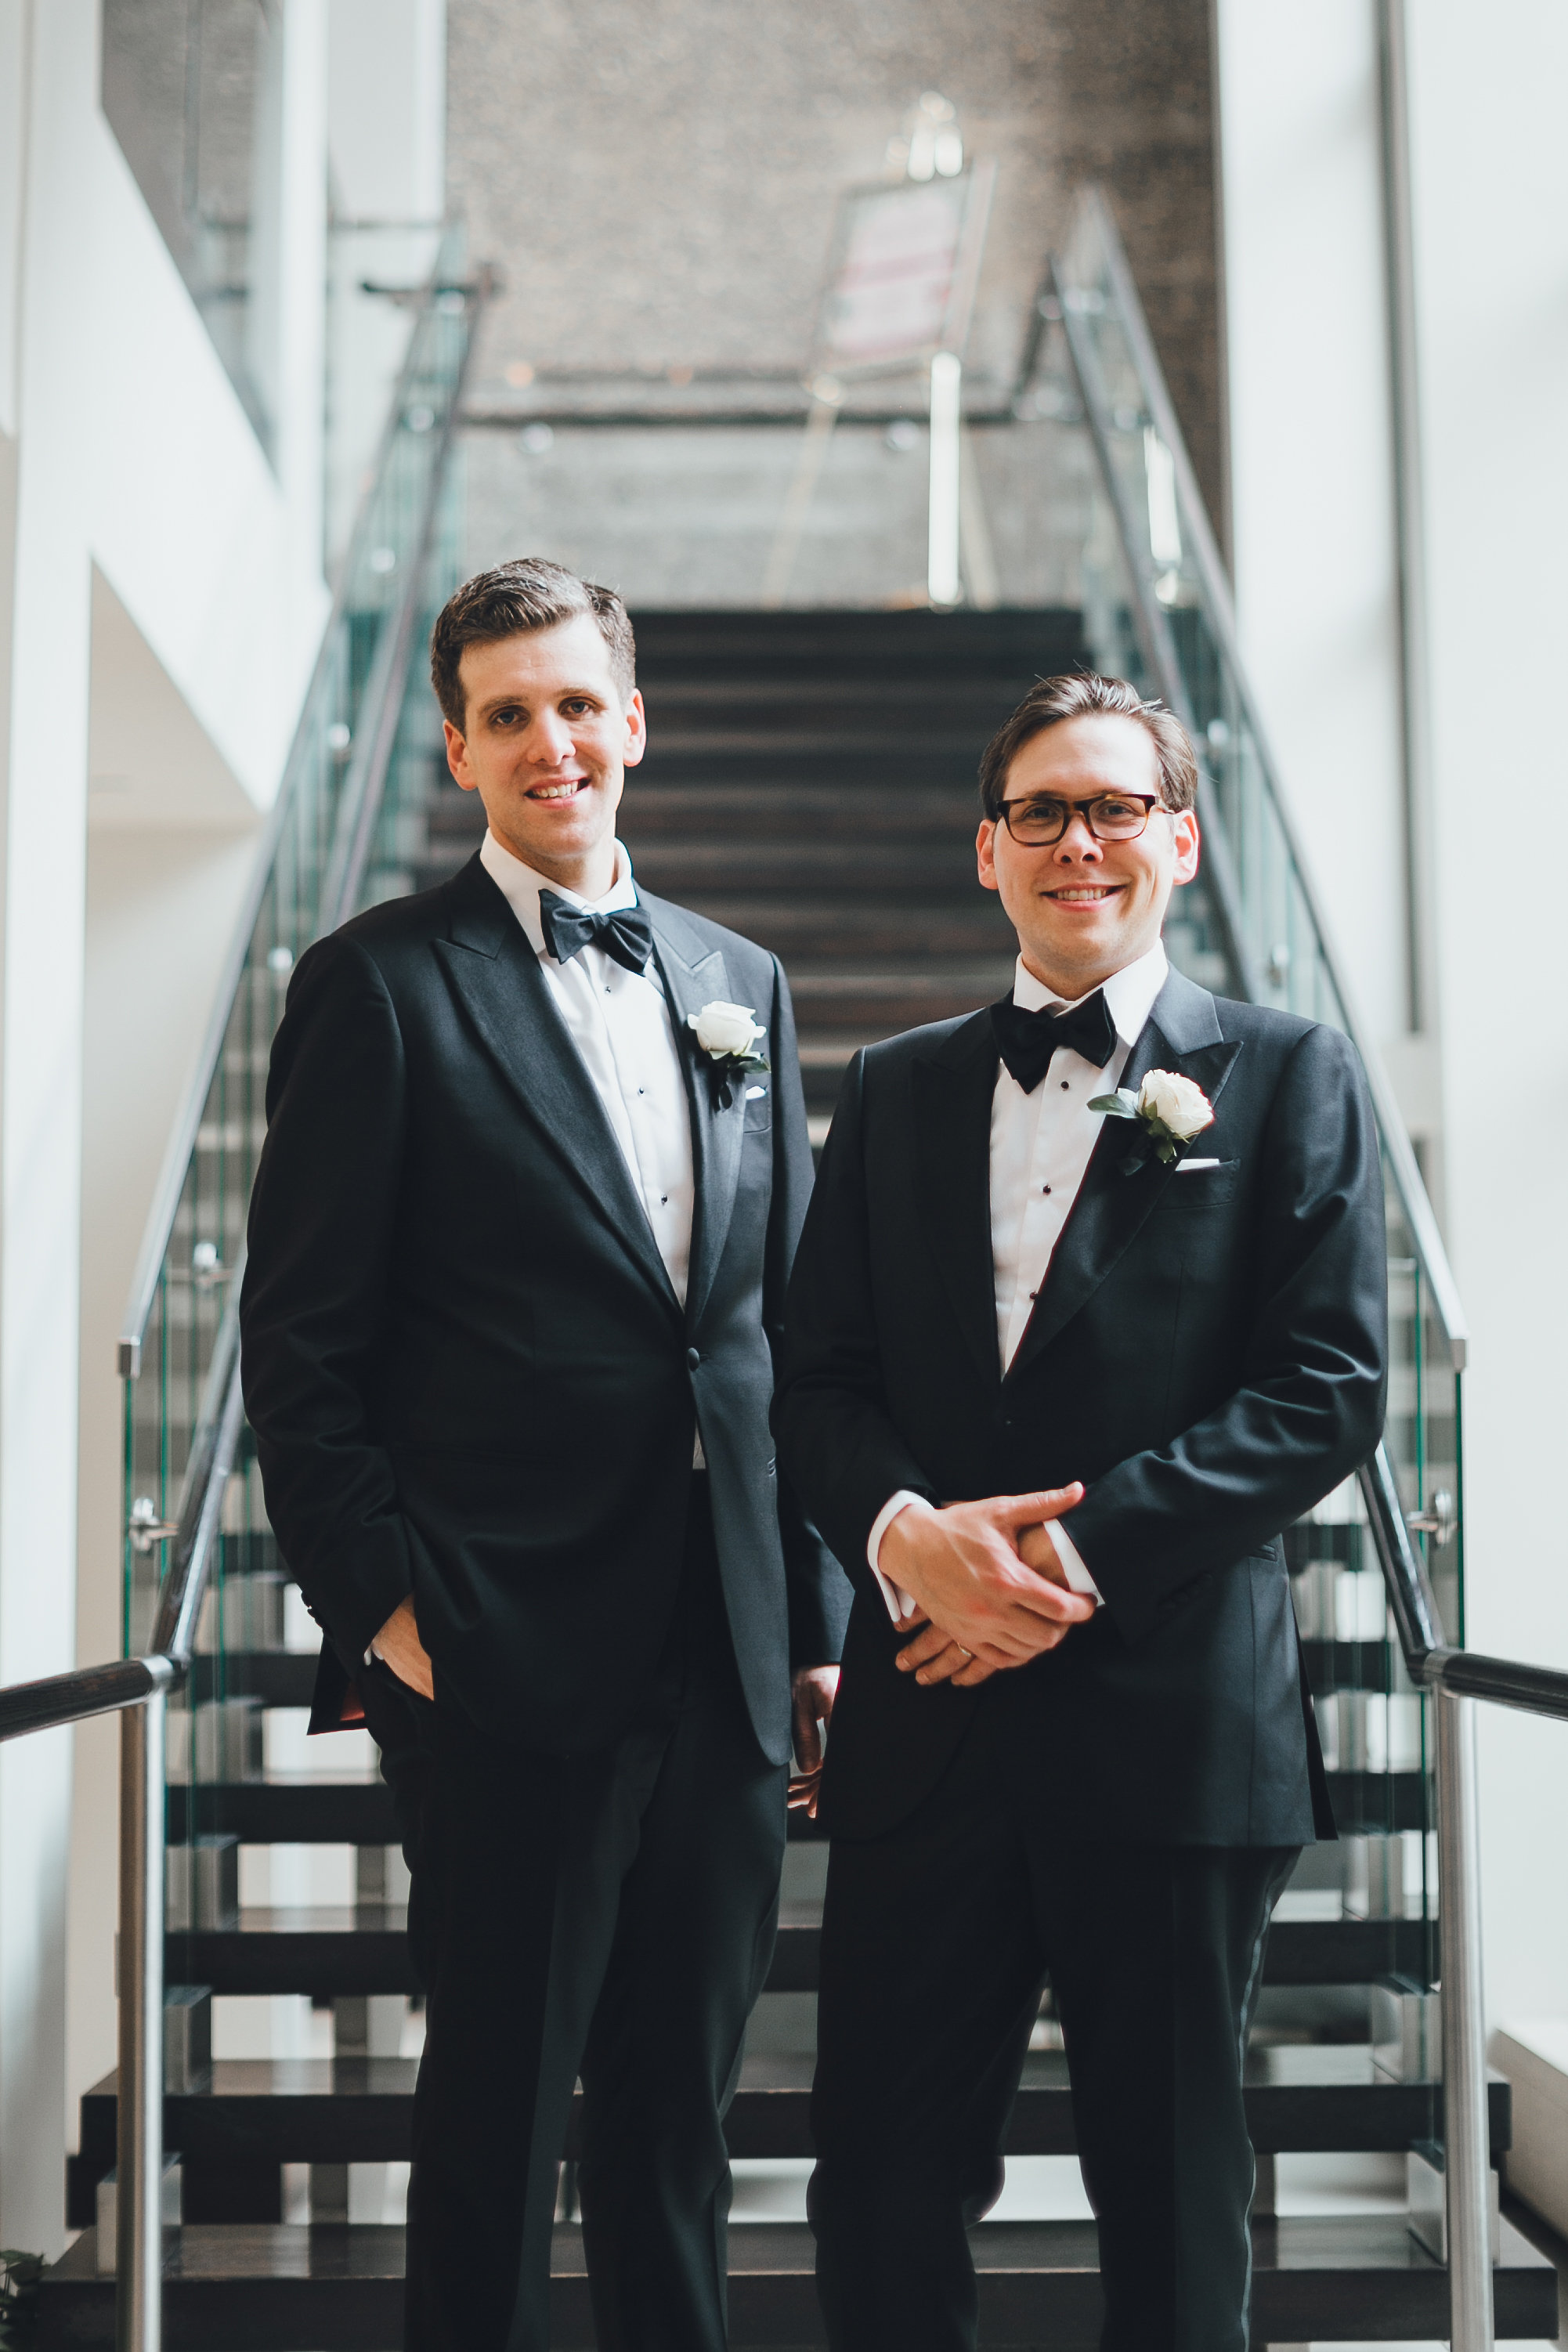 Two grooms smiling for the camera